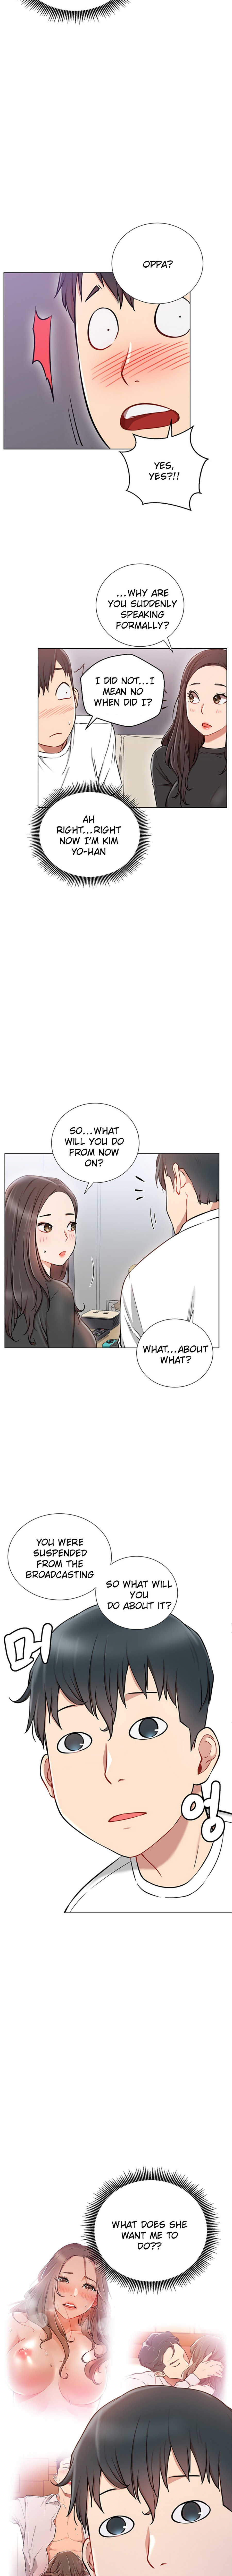 do-you-want-to-collab-chap-7-3